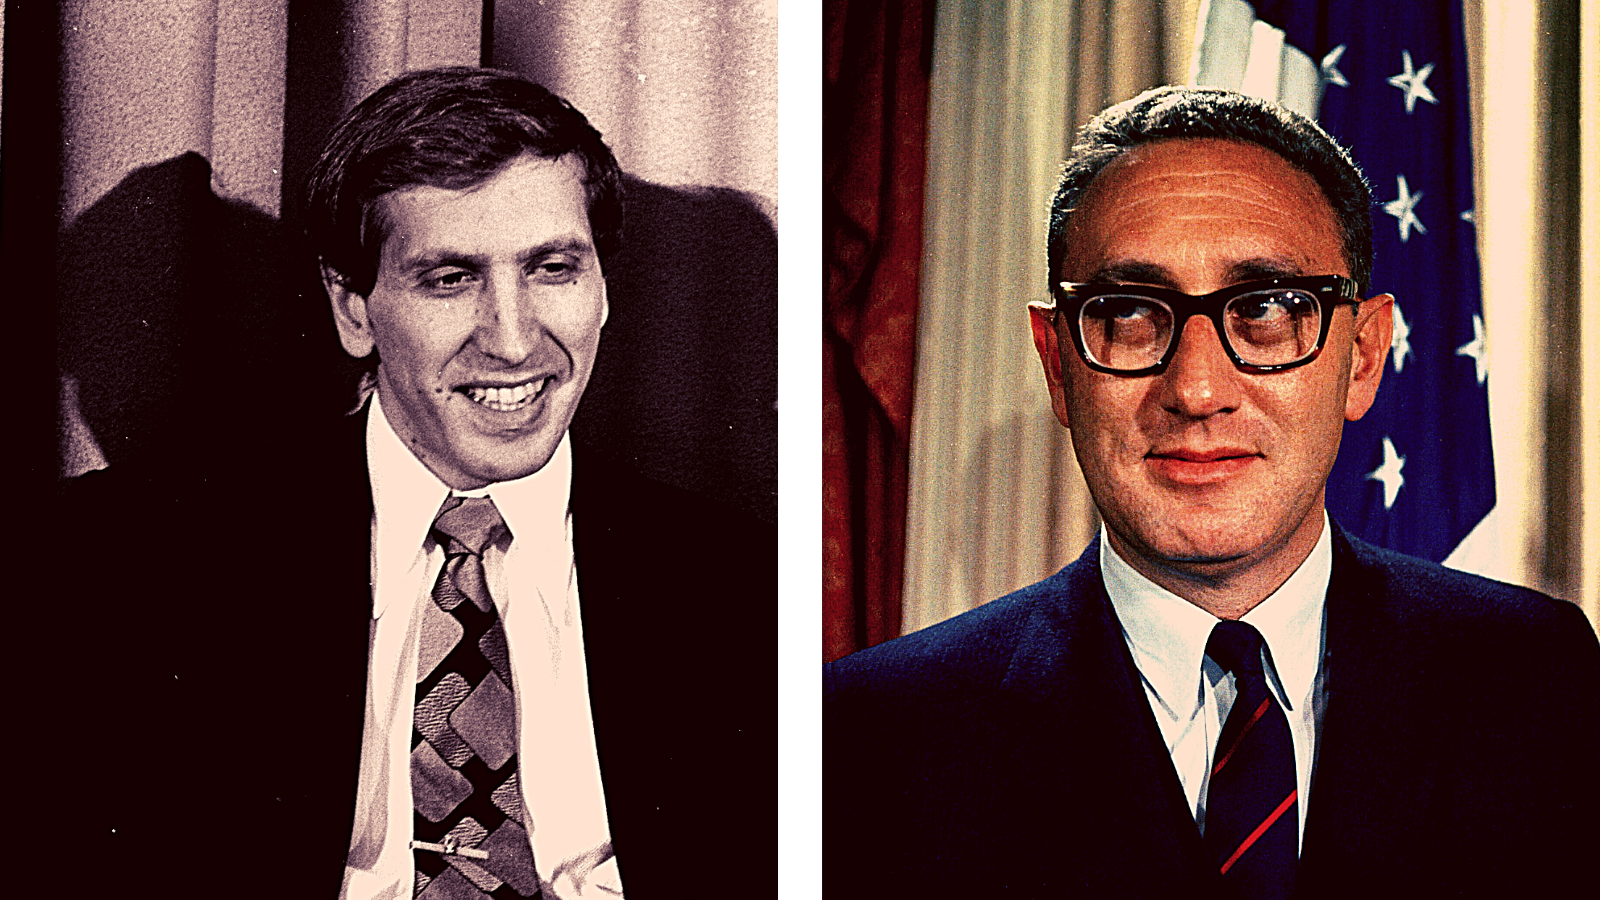 When Henry Kissinger called chess legend Bobby Fischer to coax him